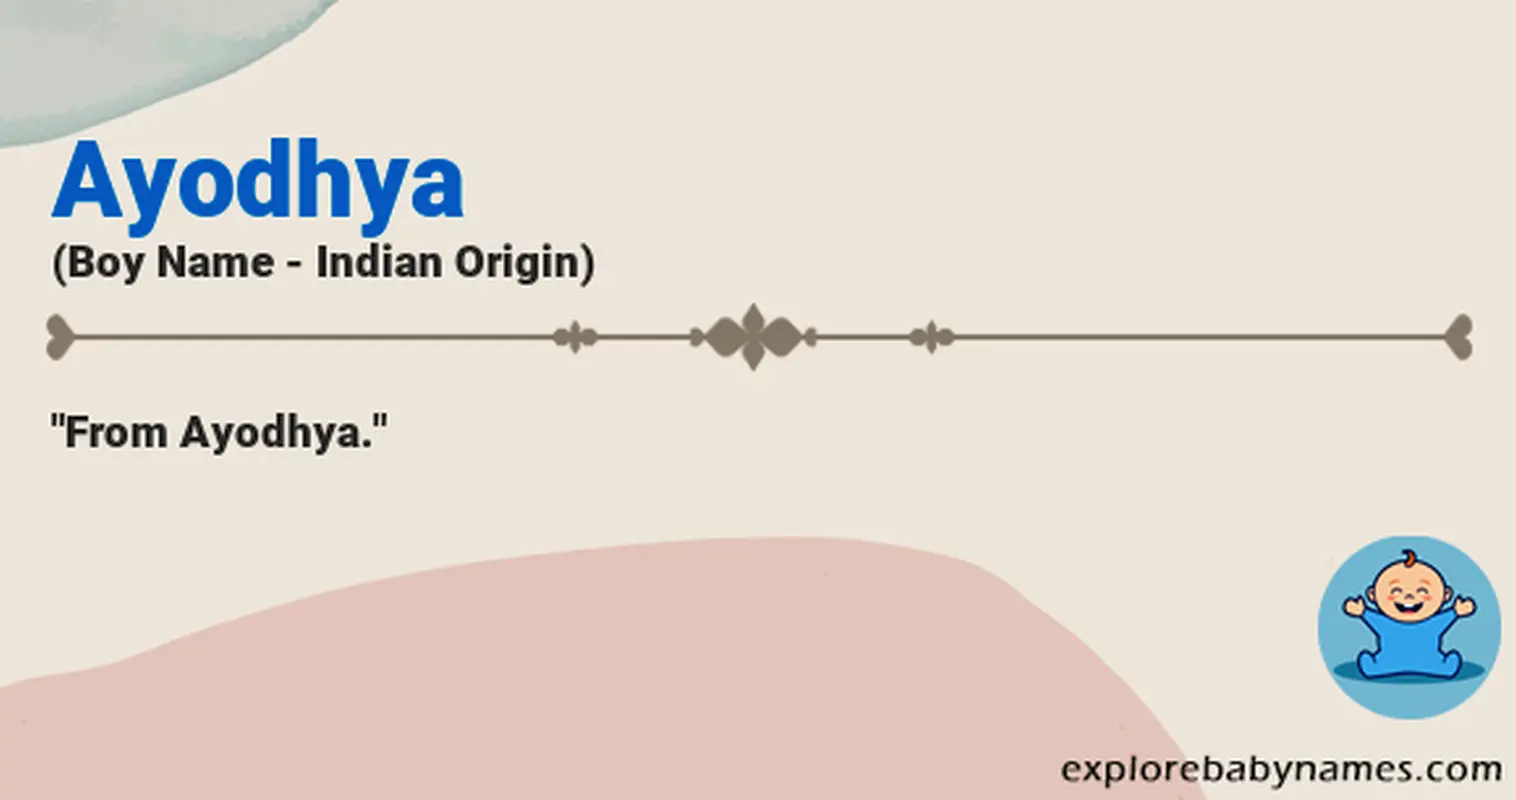 Meaning of Ayodhya